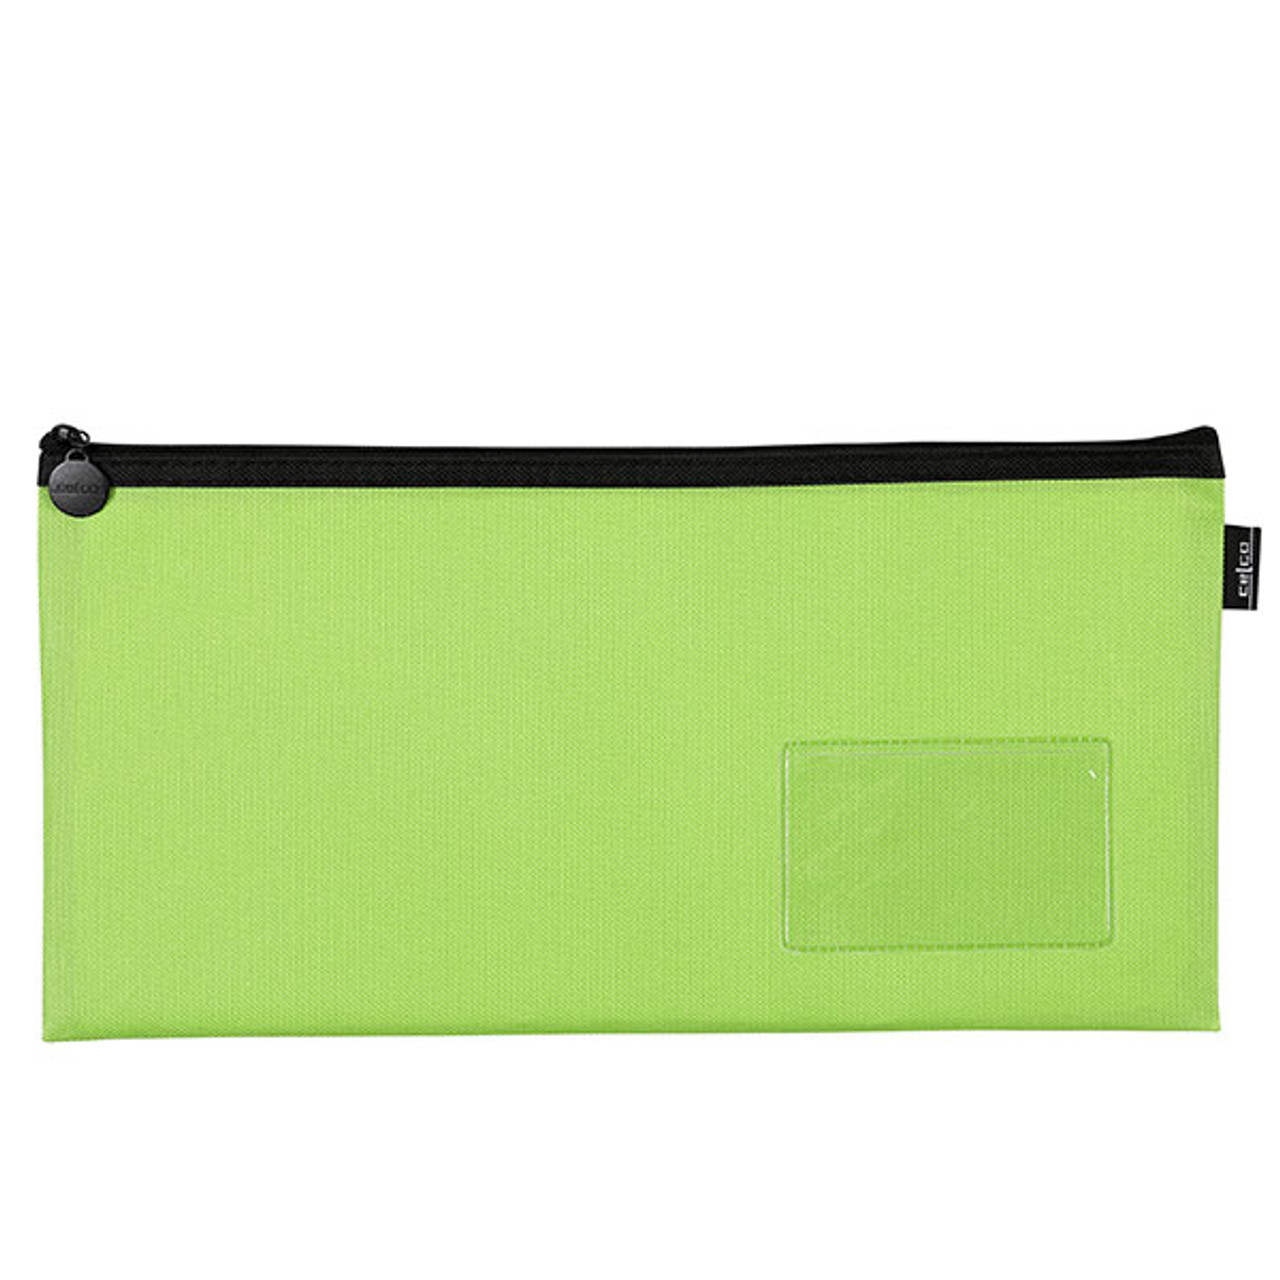 CELCO PENCIL CASE 1 ZIP MED LIME GREEN 350mm x 180mm with Front Insert ...